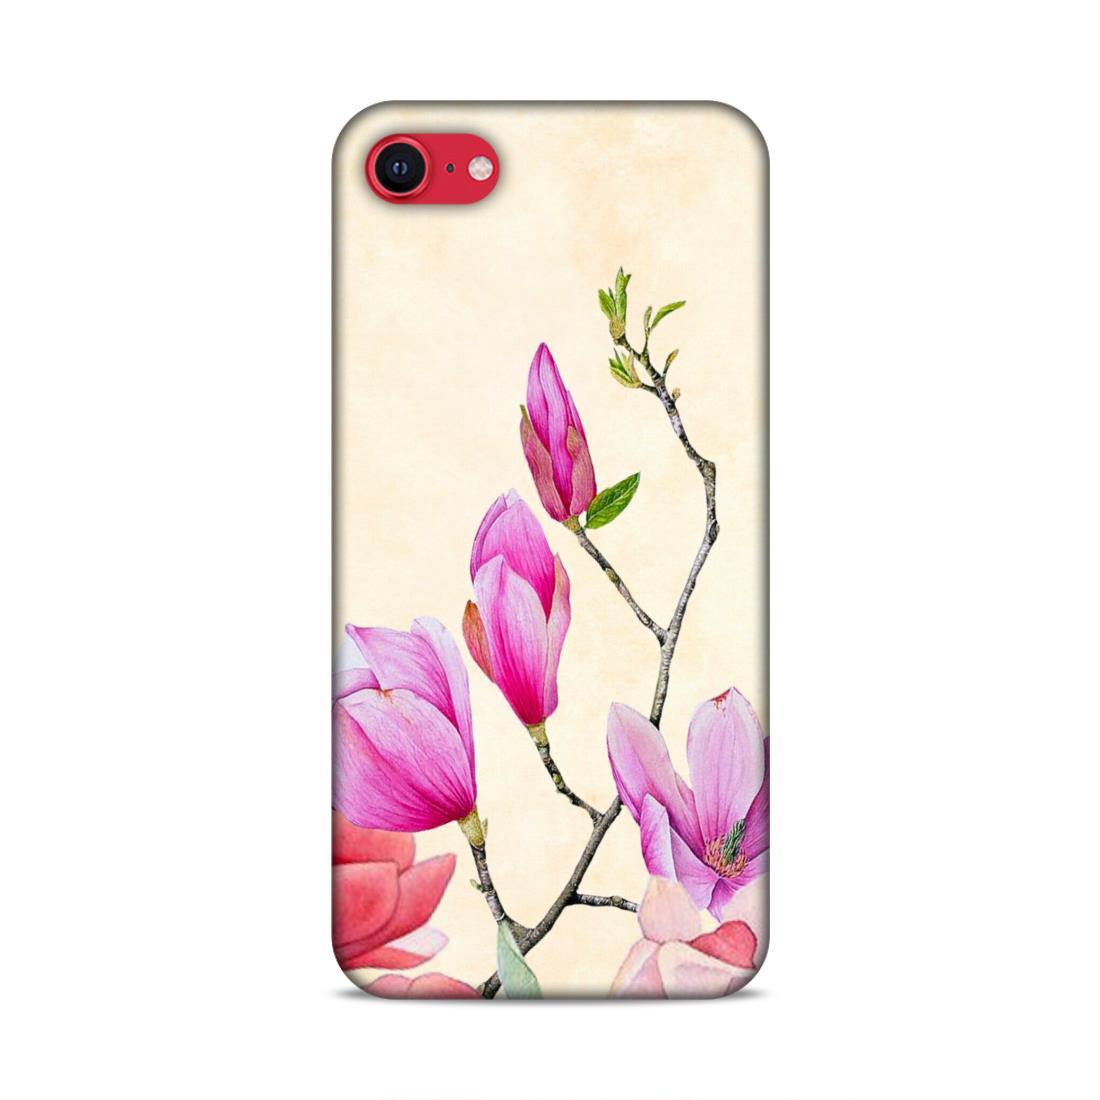 Pink Flower iPhone SE 2020 Mobile Cover Case